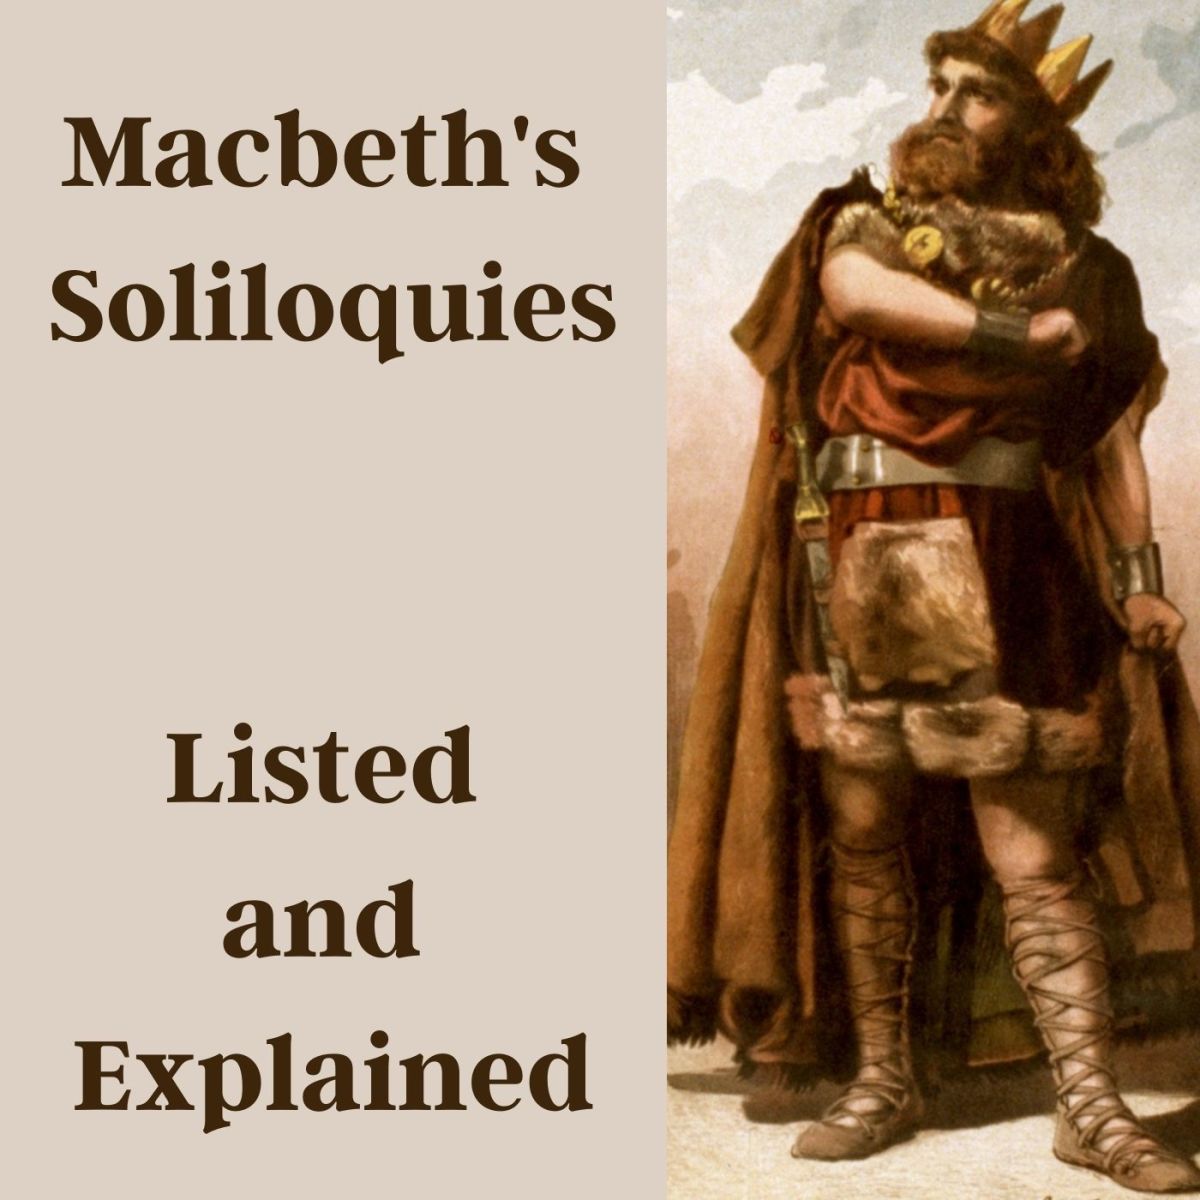 Macbeth's Soliloquies Listed and Explained